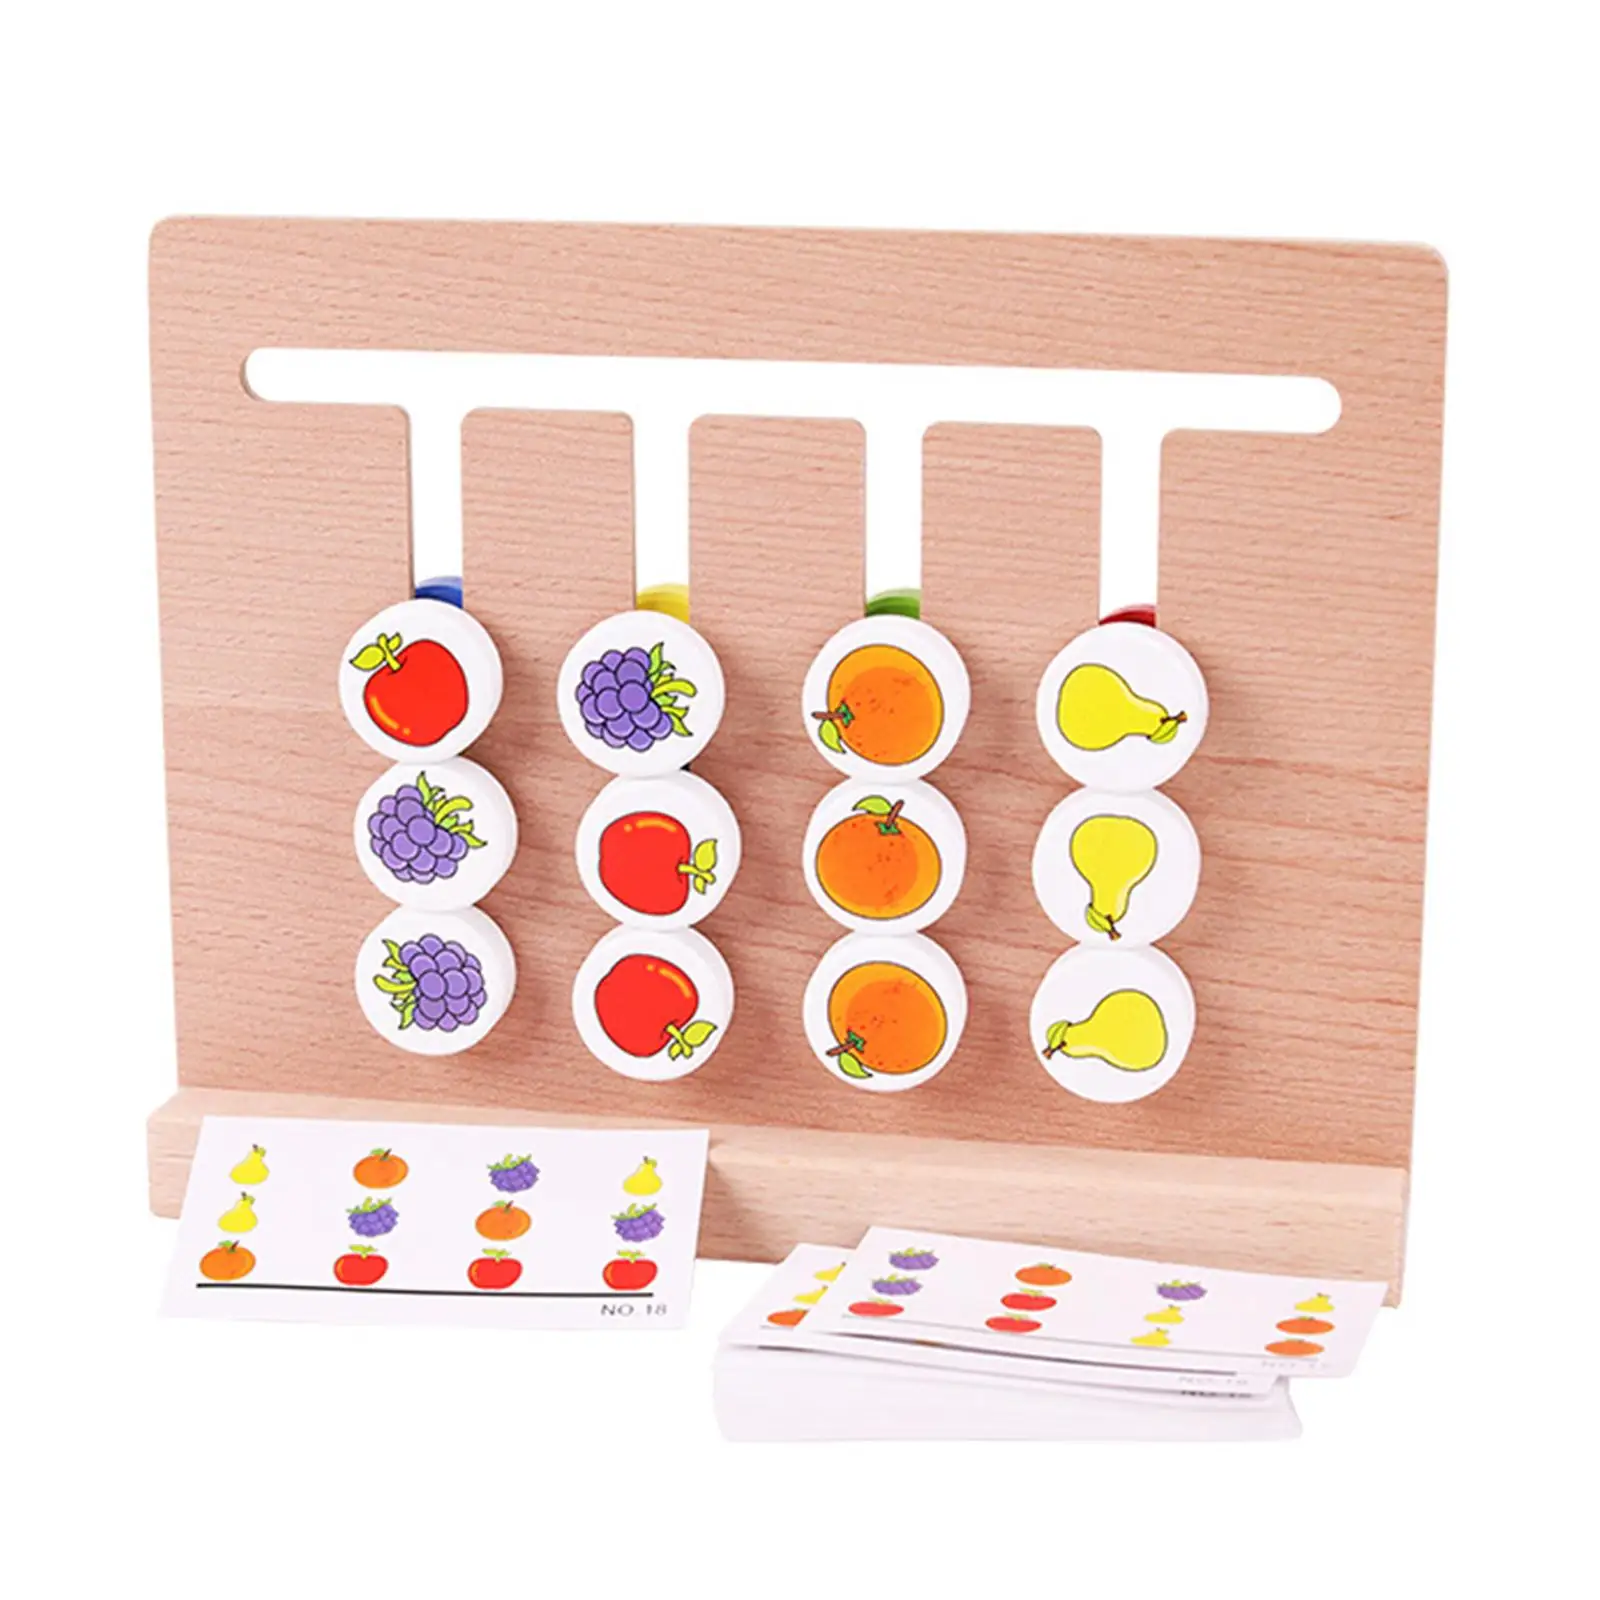 Early Childhood Education Matching Game Developmental Toy for Preschool